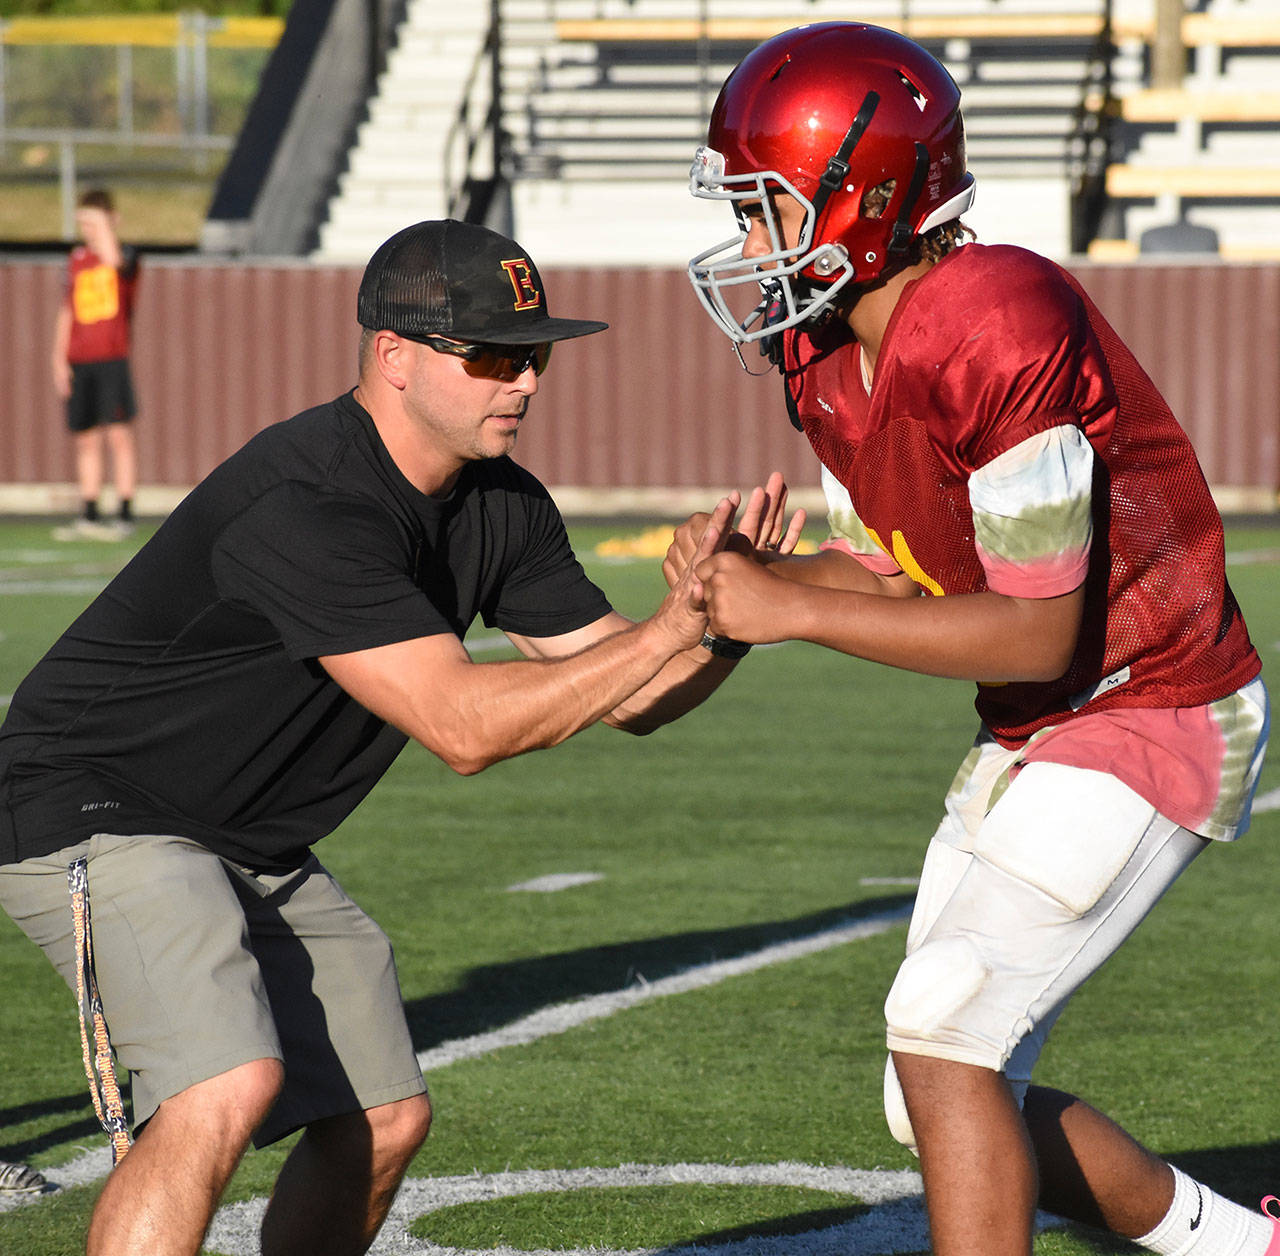 Coach Mark Gunderson works on technique with one of his players during an Aug. 28 practice. Photo by Kevin Hanson